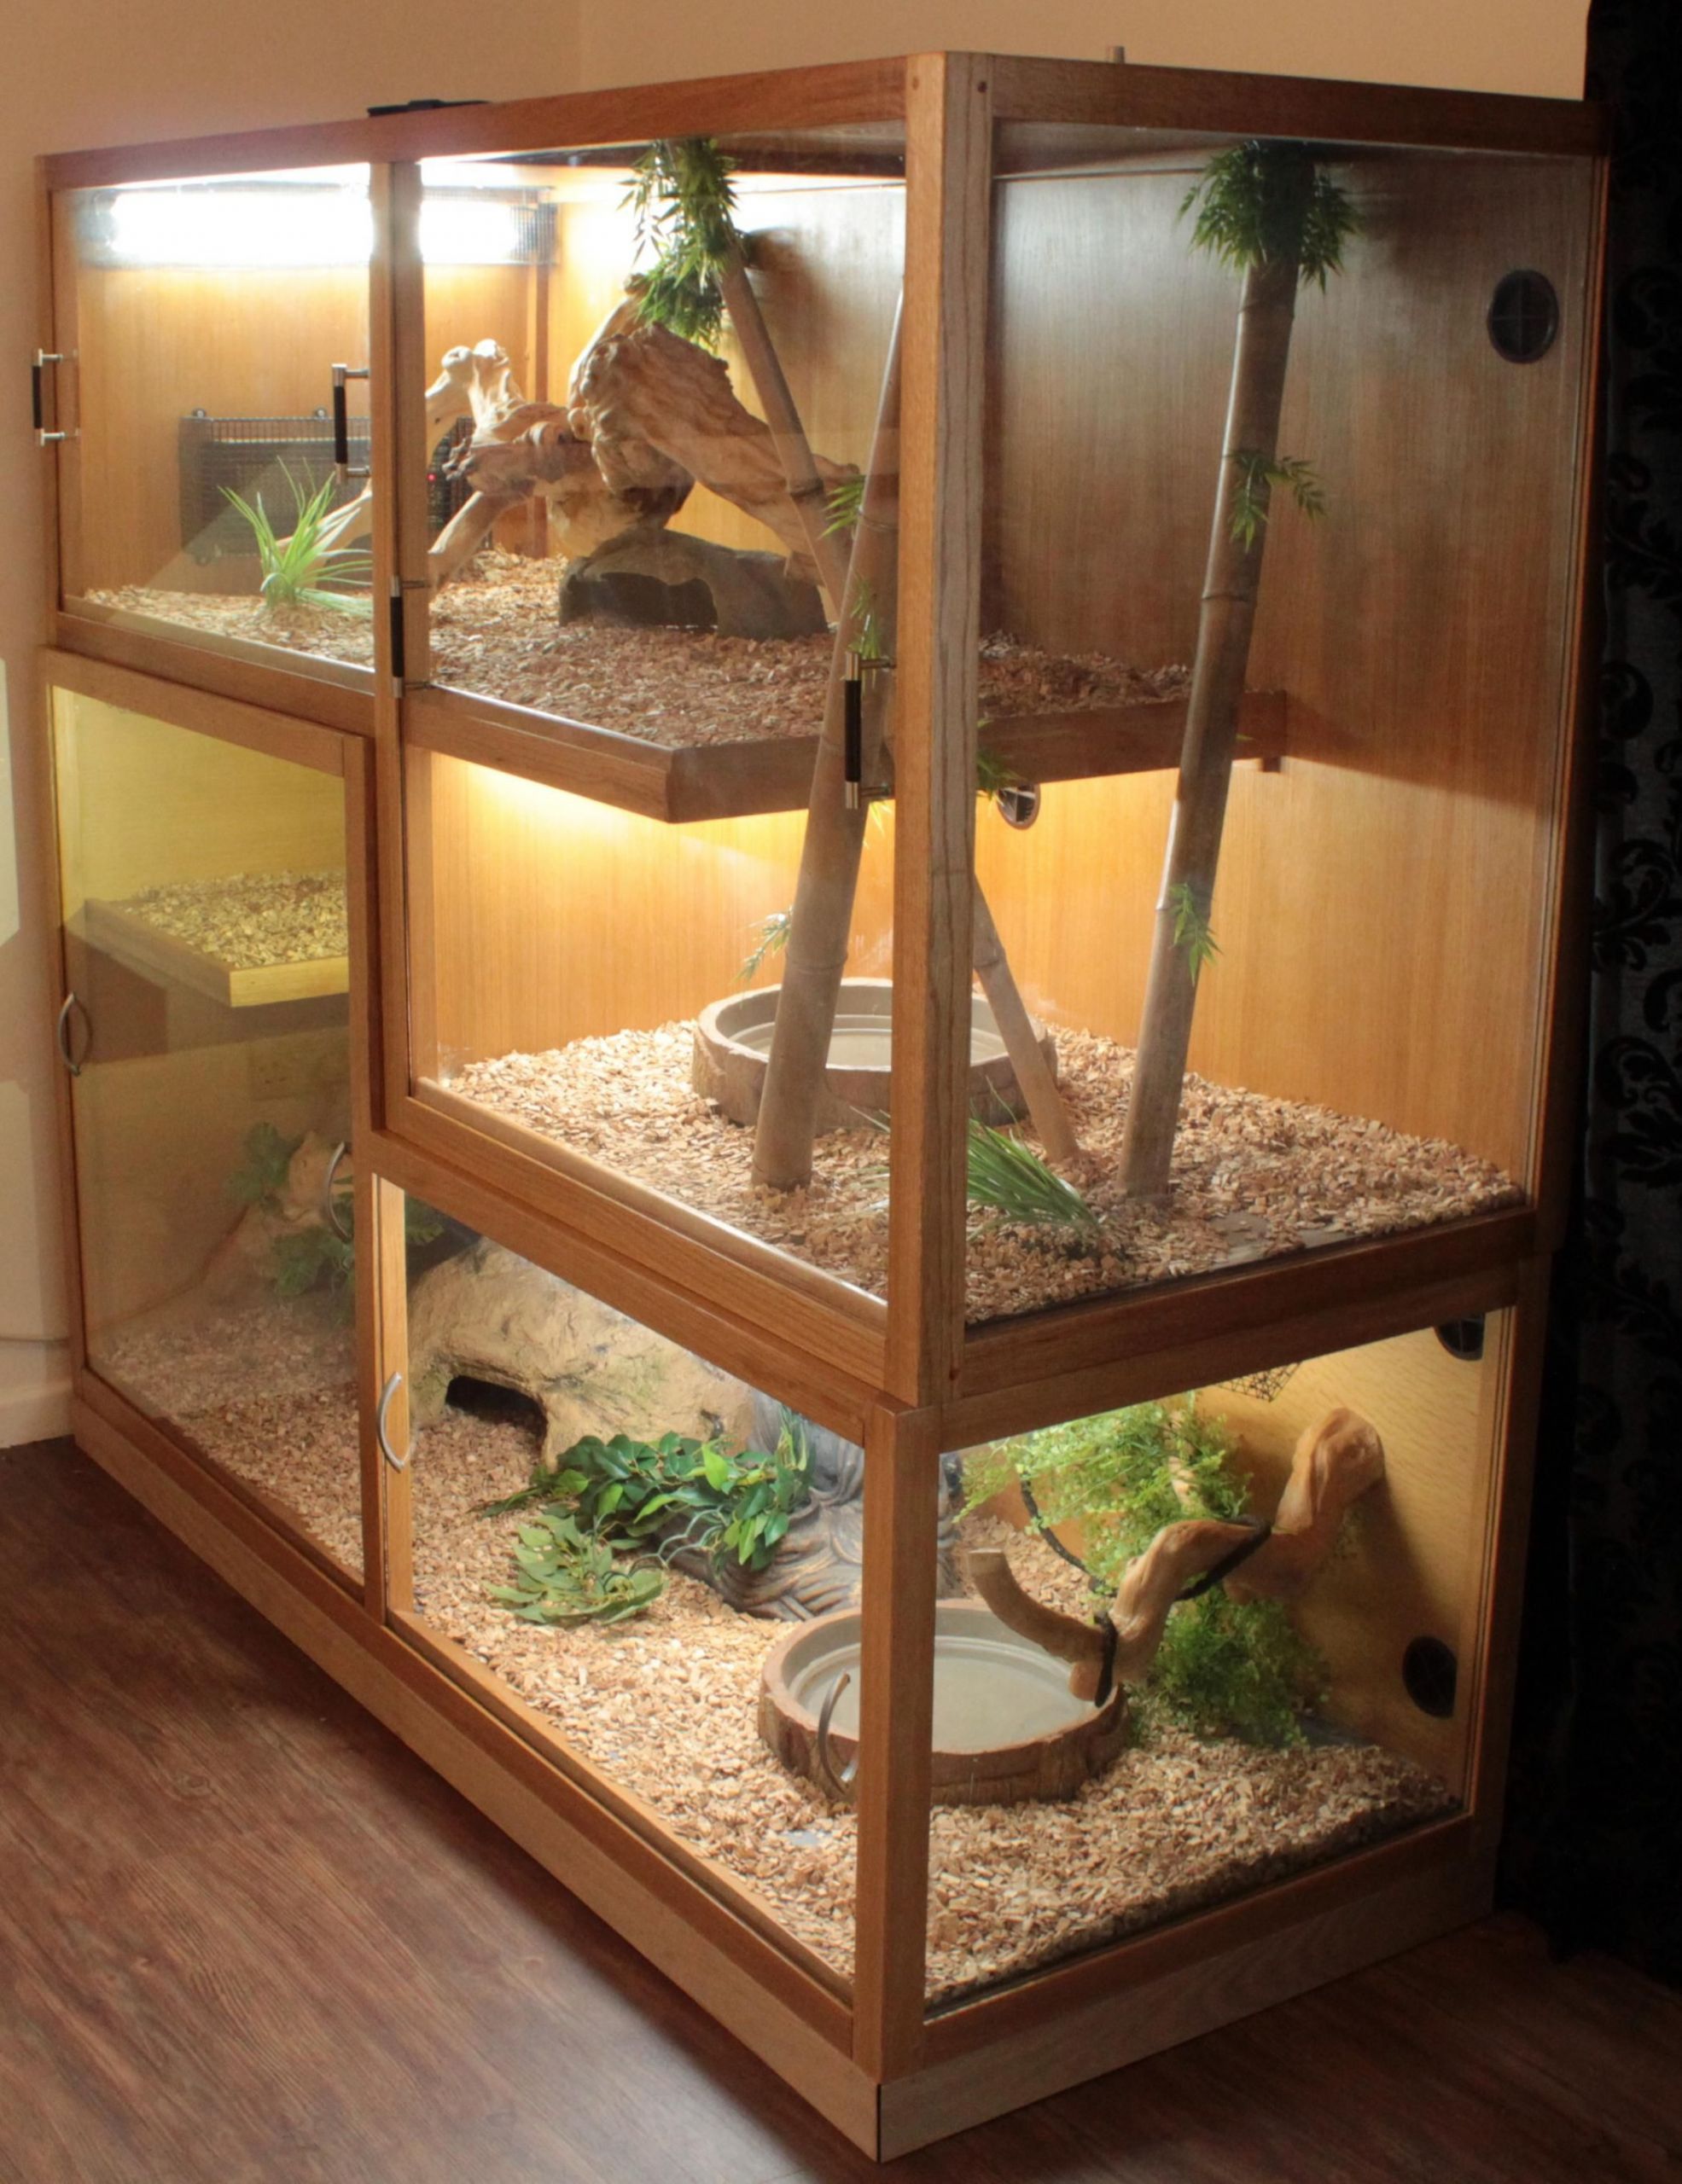 DIY Chameleon Cage Plans
 25 Awesome Diy Reptile Enclosure Meowlogy